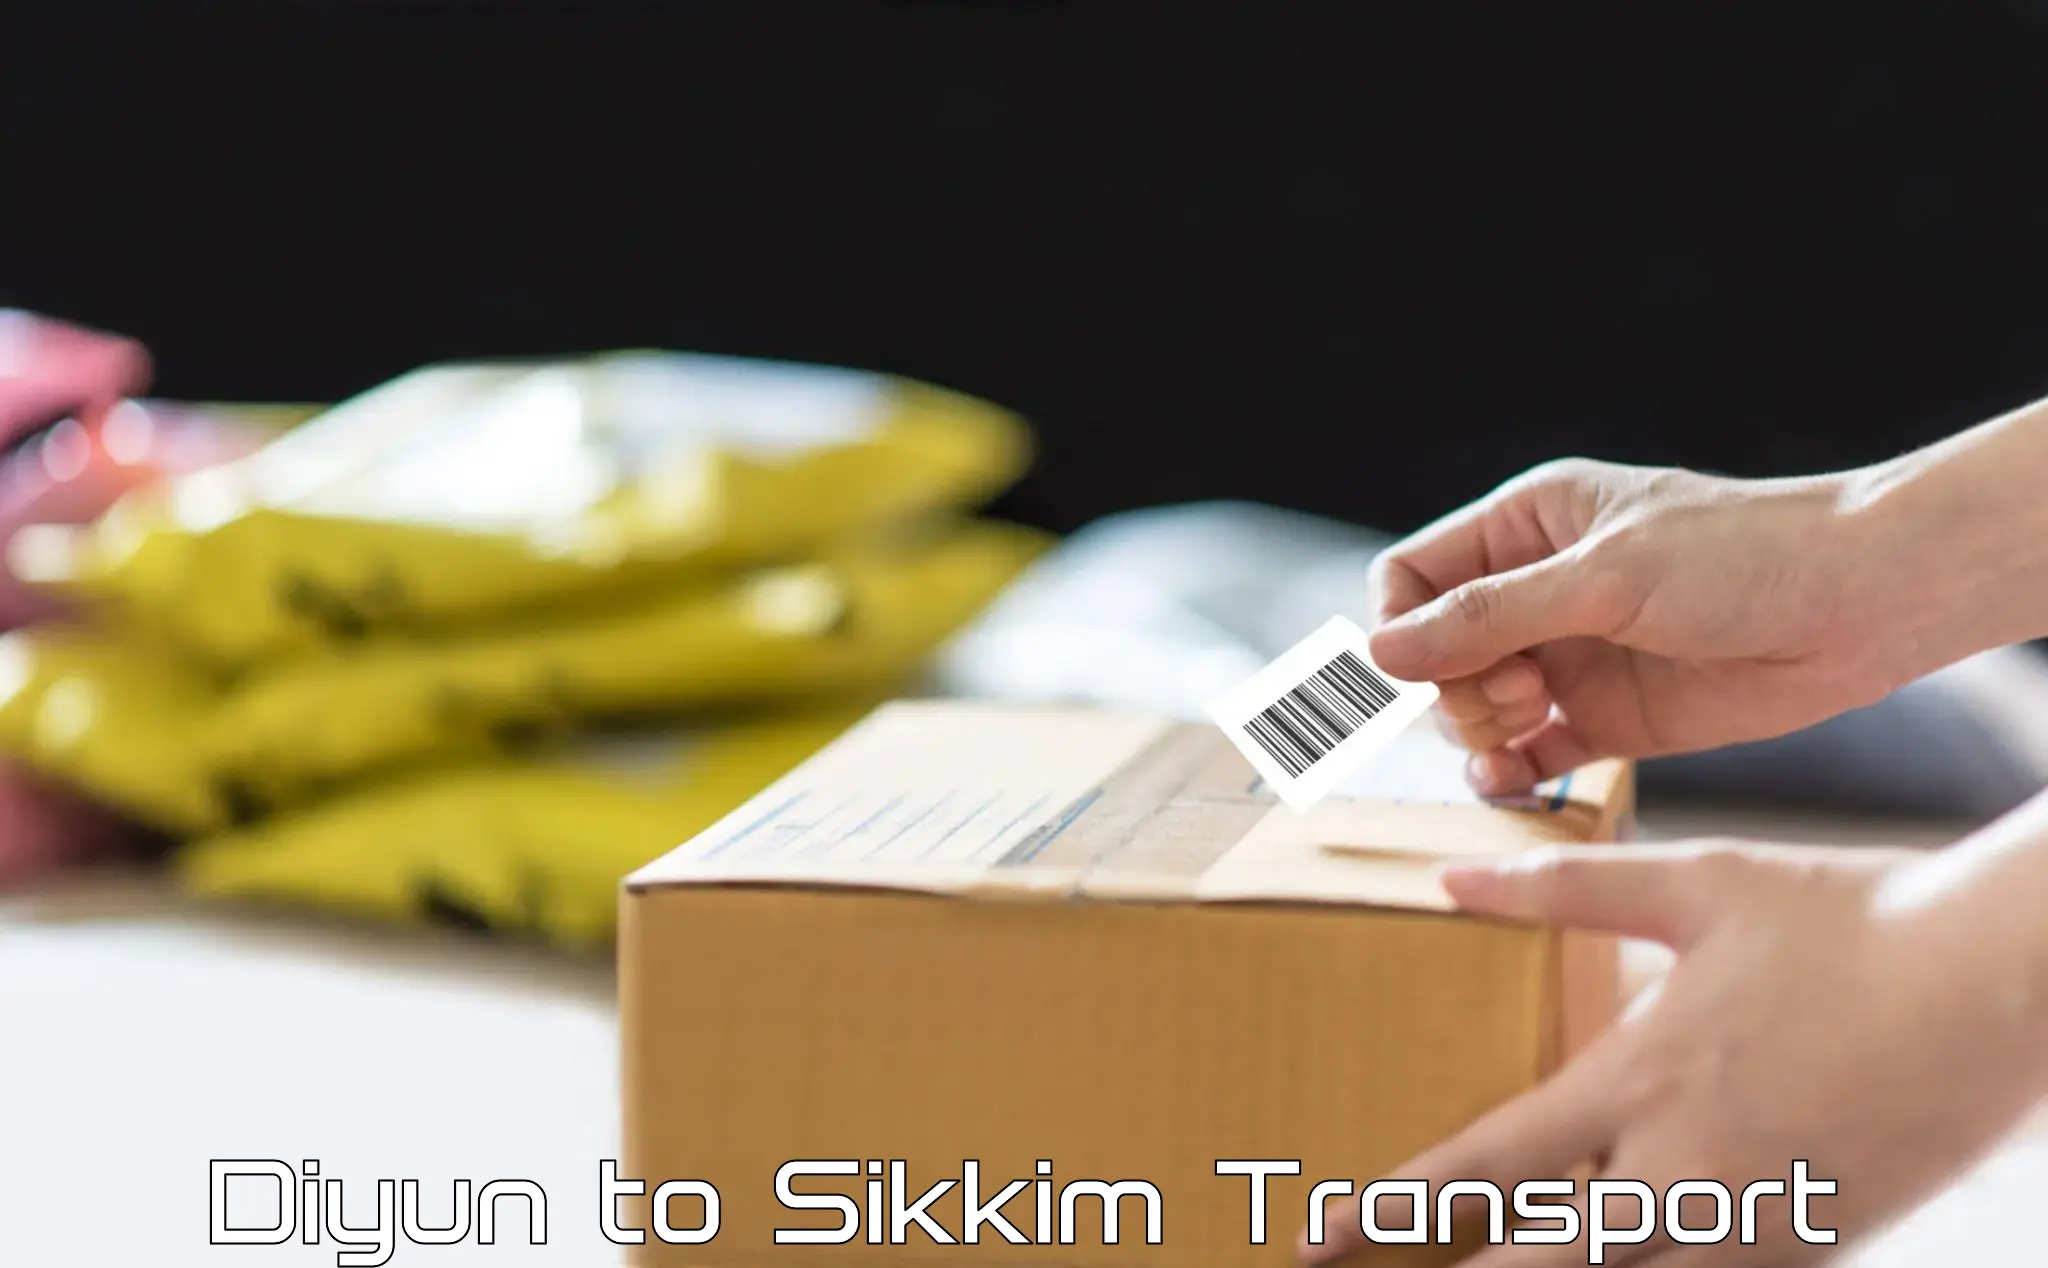 Shipping partner in Diyun to East Sikkim